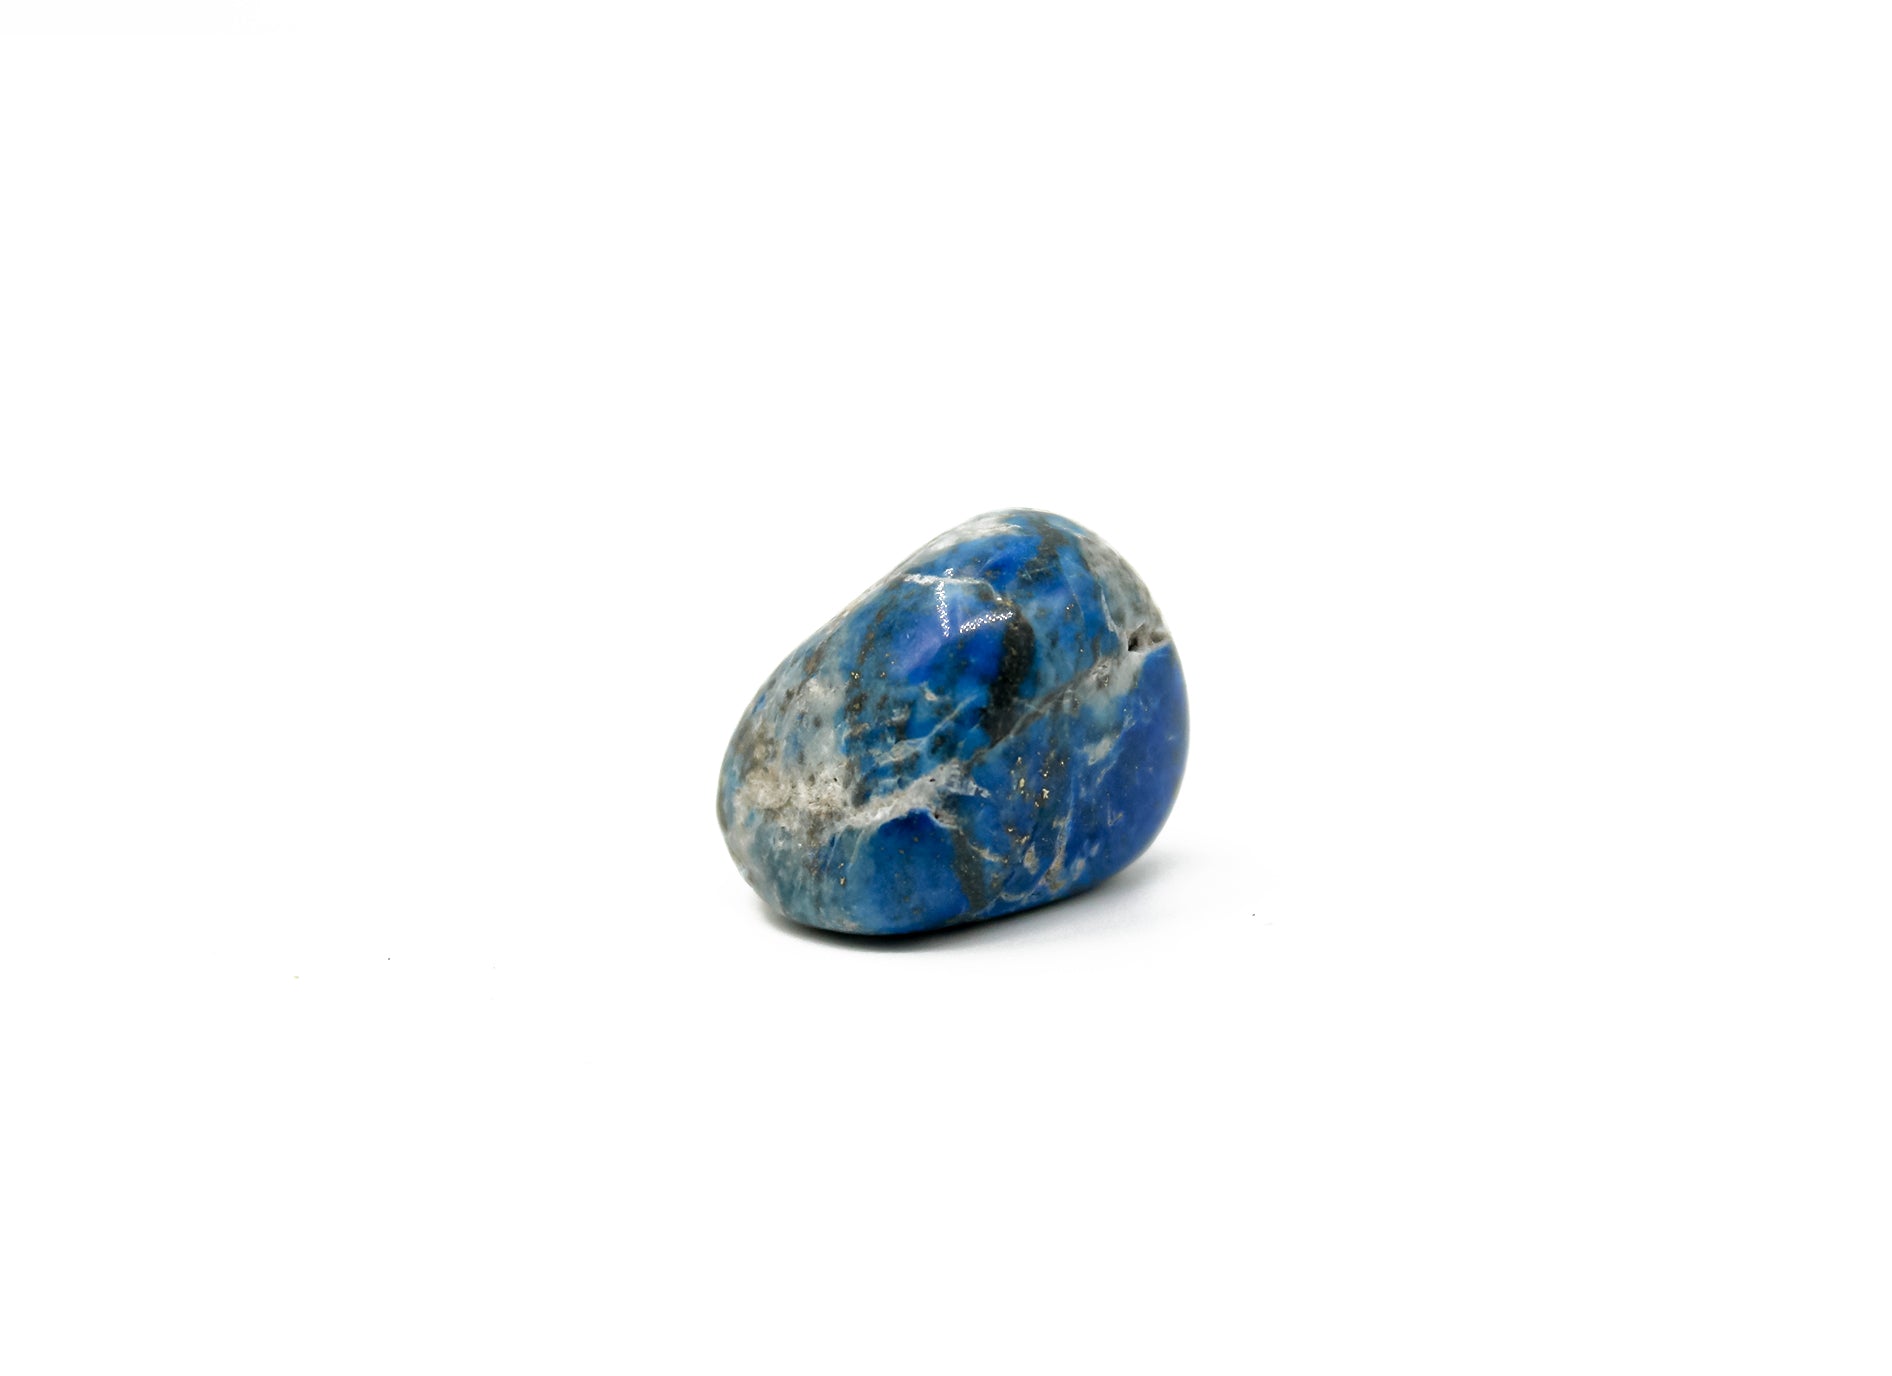 Lapis Lazuli Meaning, Properties, and Benefits - Solacely